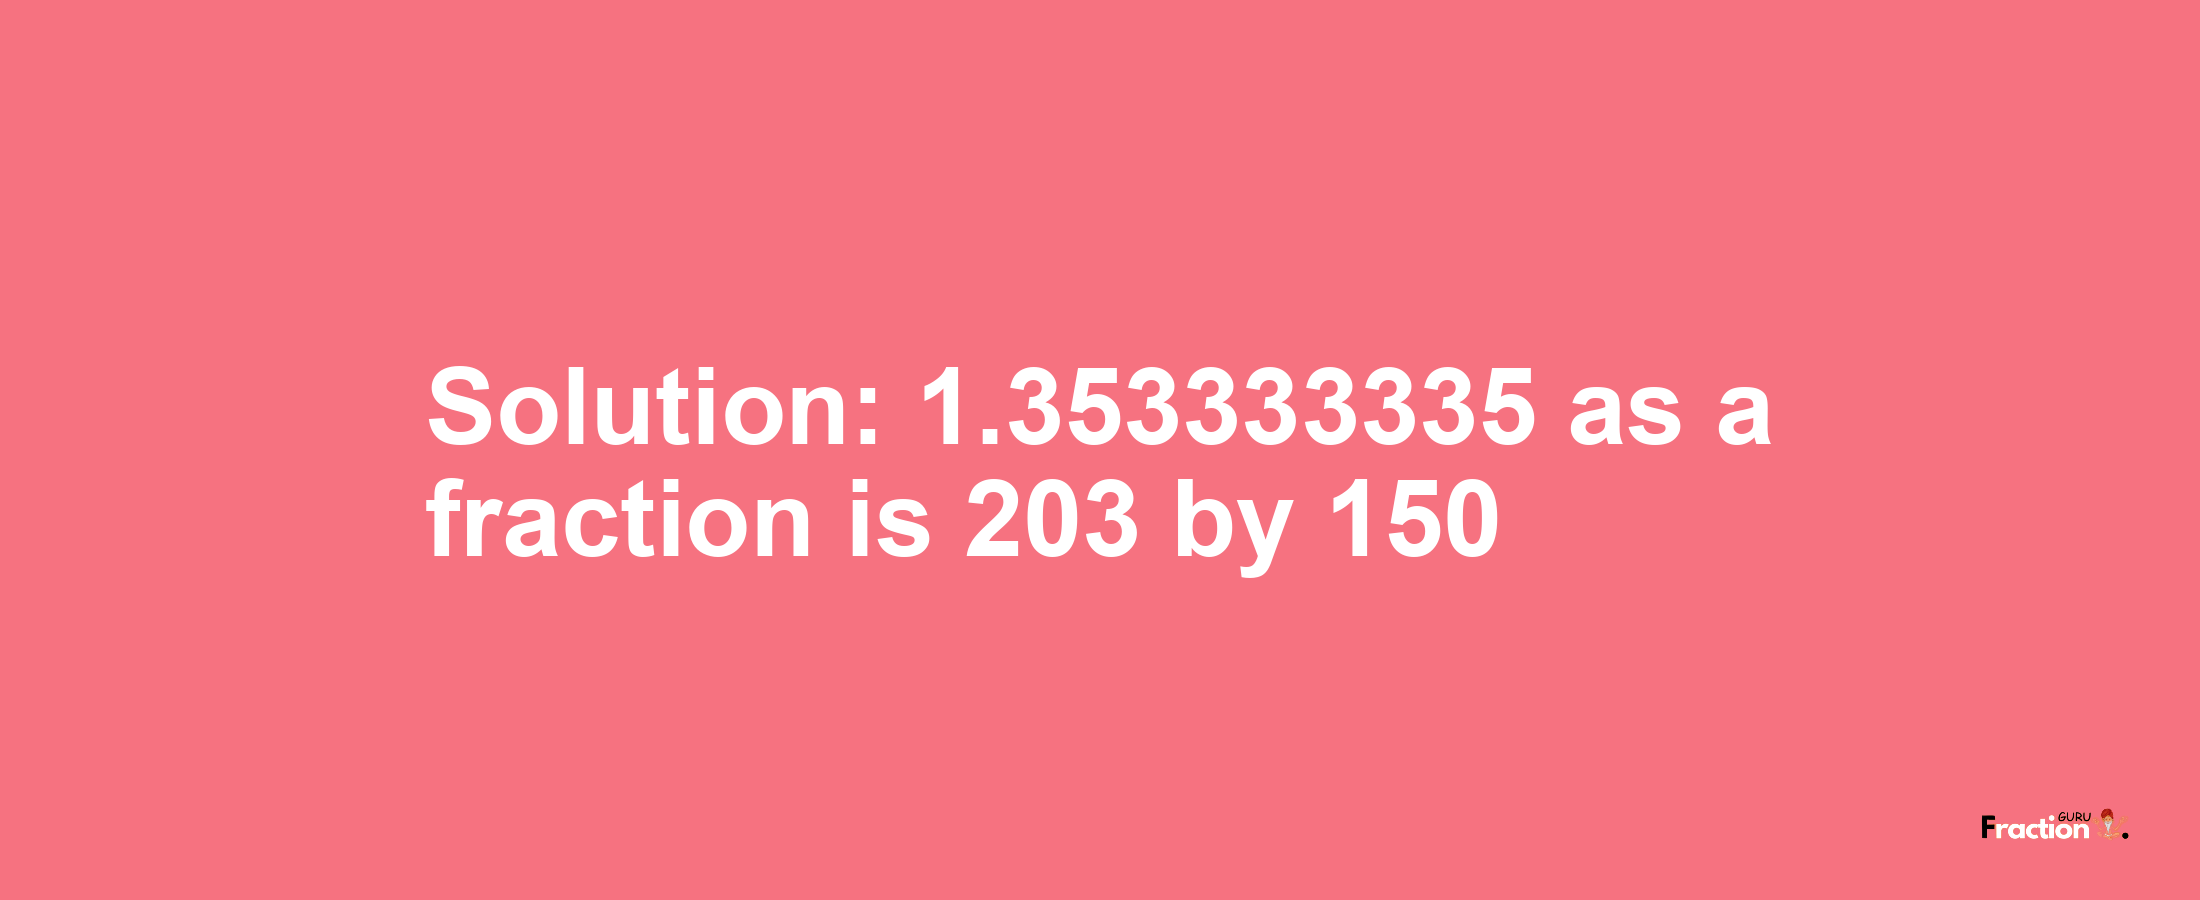 Solution:1.353333335 as a fraction is 203/150